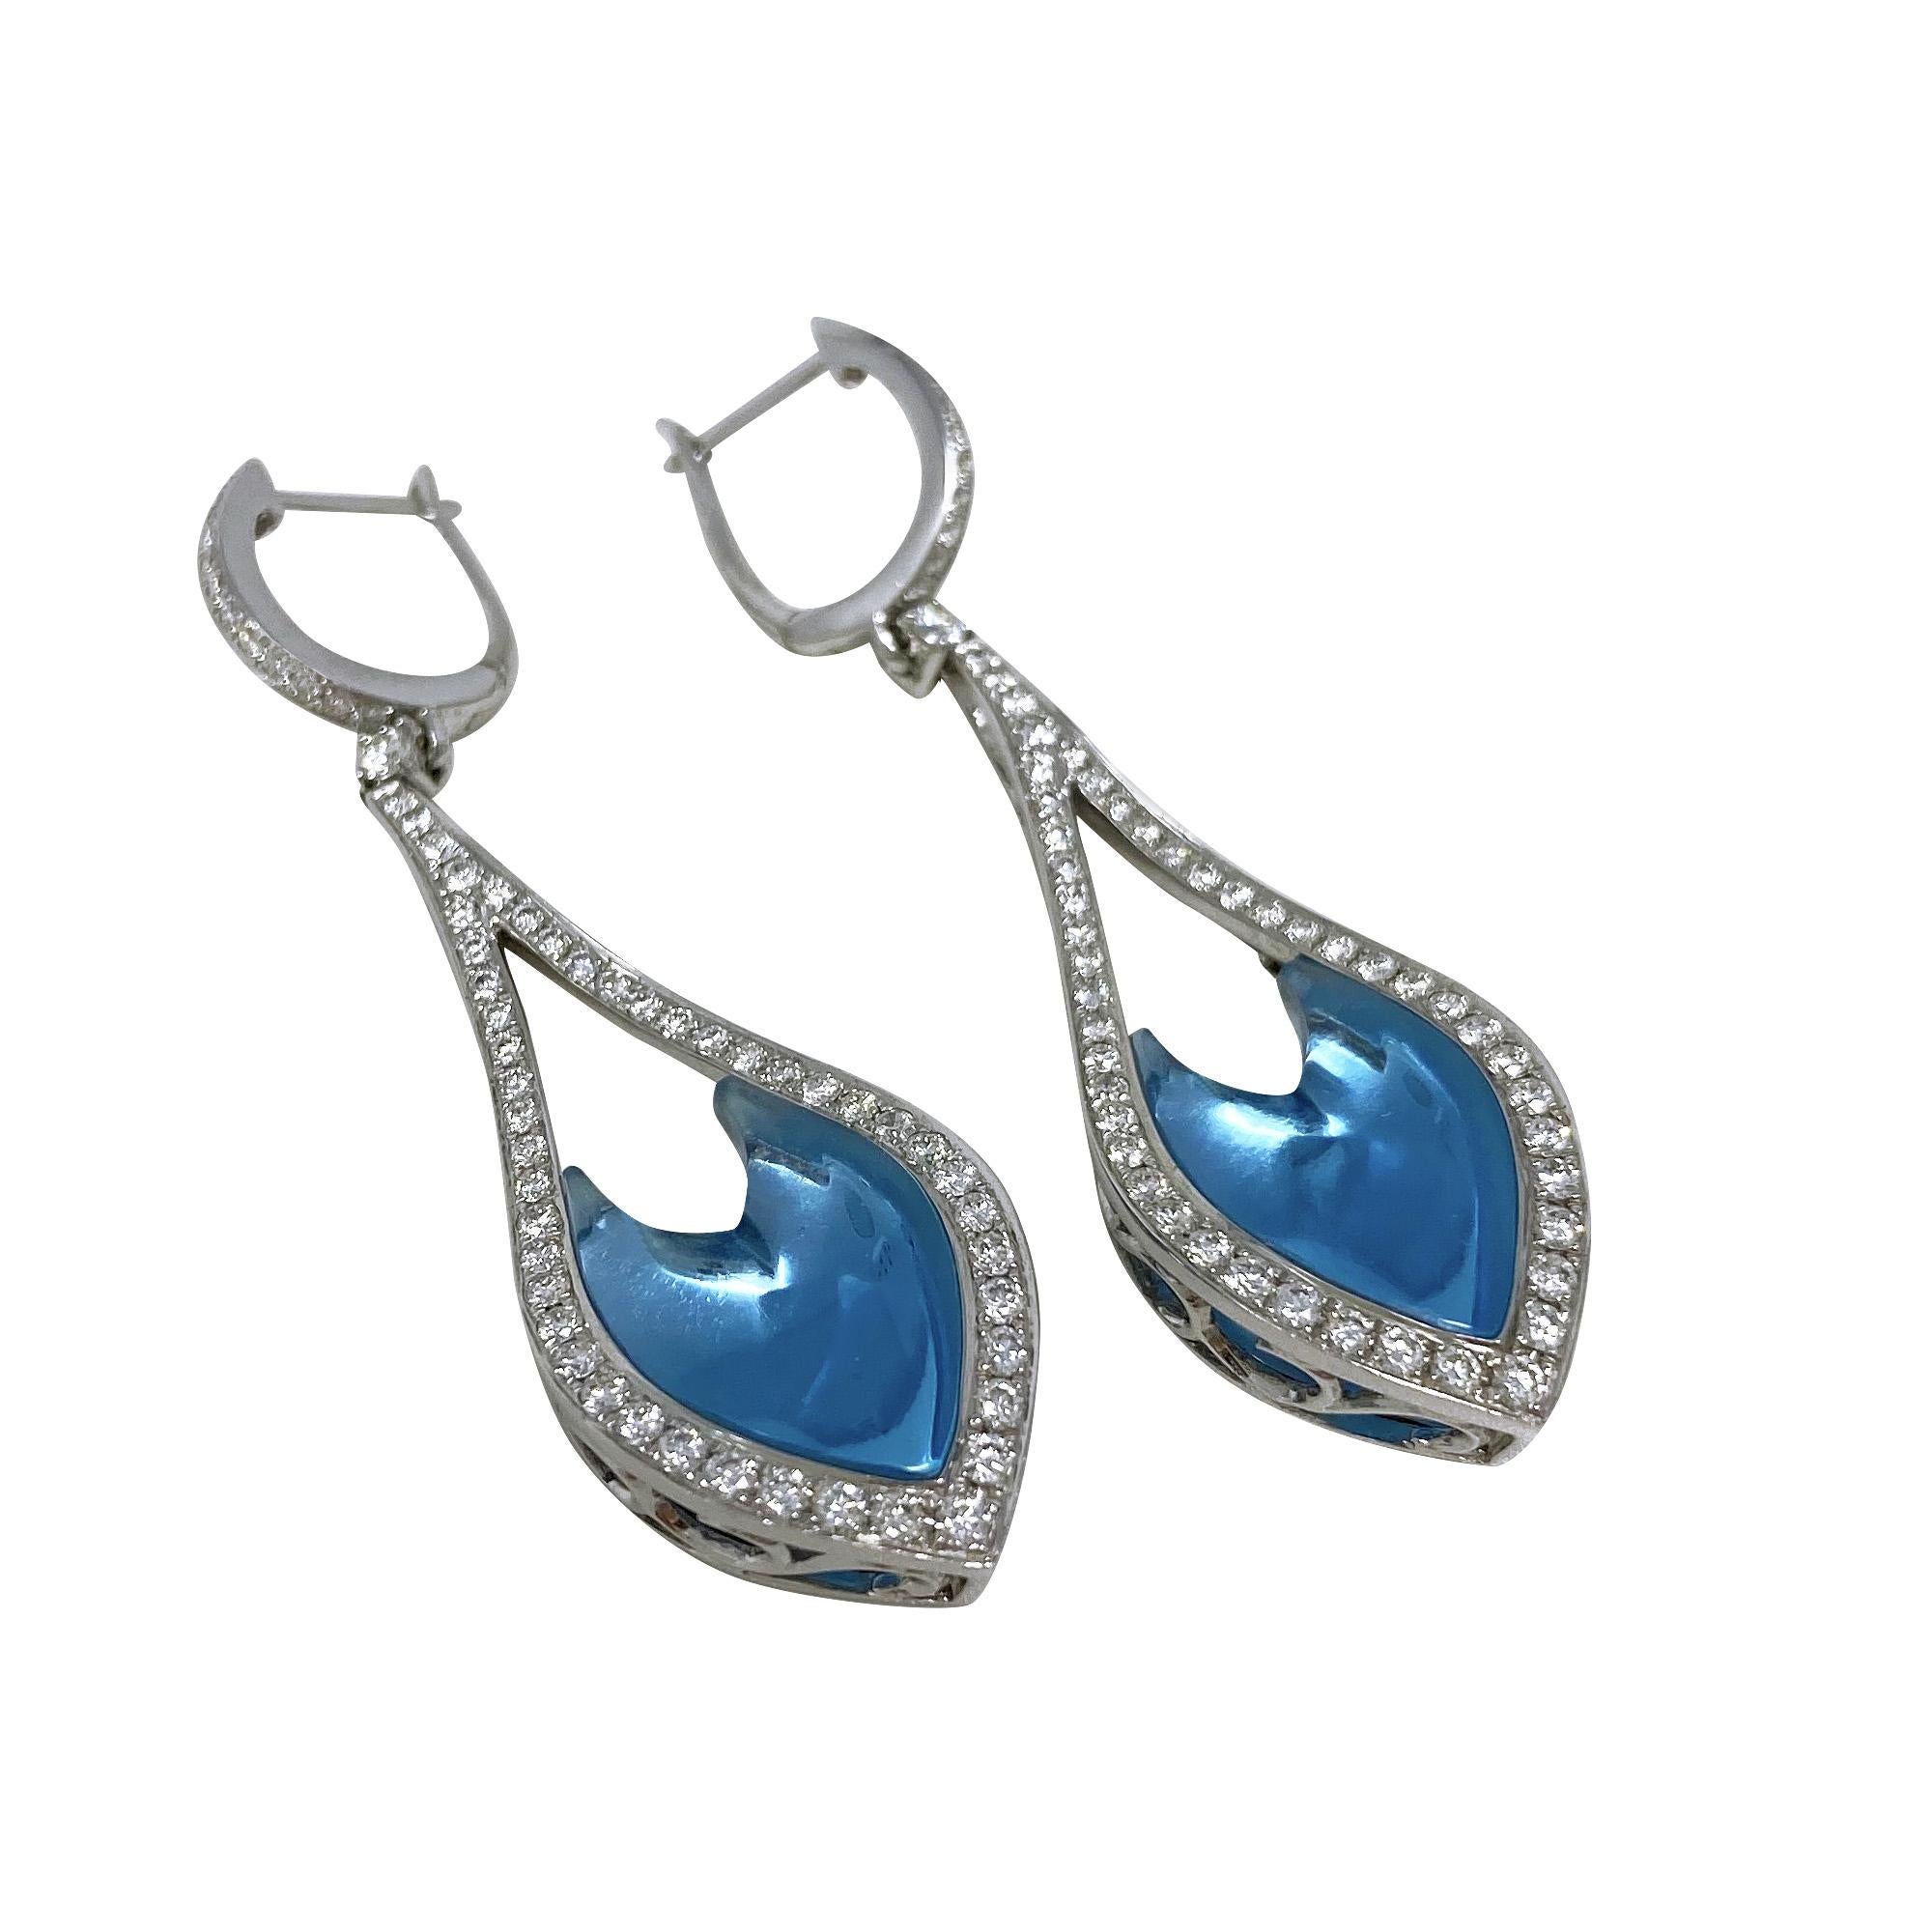 Unique and scintillating blue topaz and diamond earrings.  These fantasy cut blue topaz are sure to turn heads!  The blue topaz are accented with approximately 1.35 carats of diamonds, and are set in 14 karat white gold.